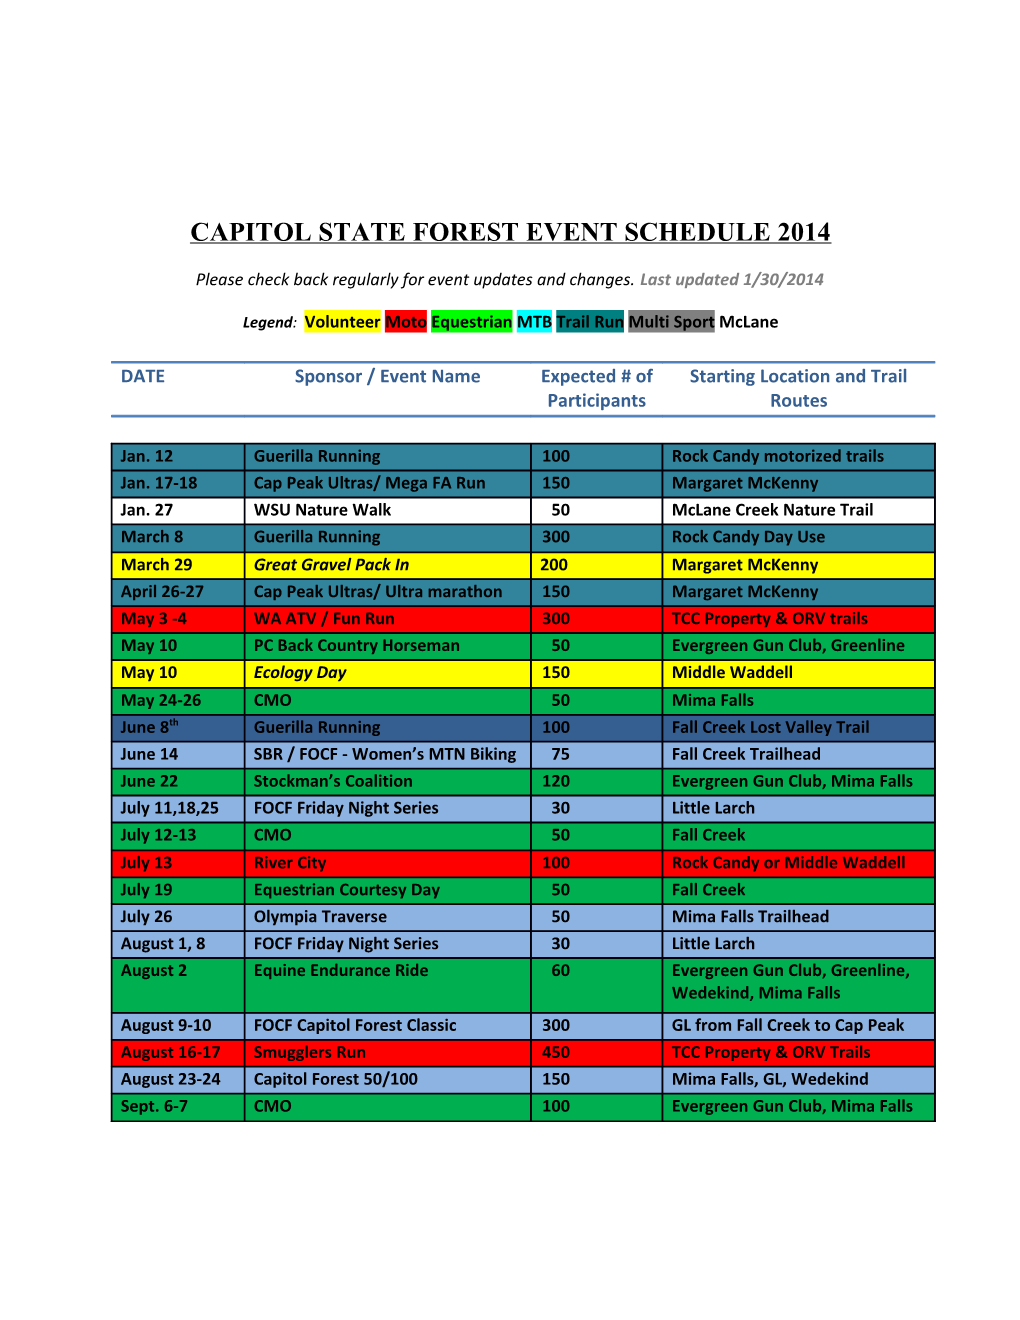 Capitol State Forest Event Schedule 2014